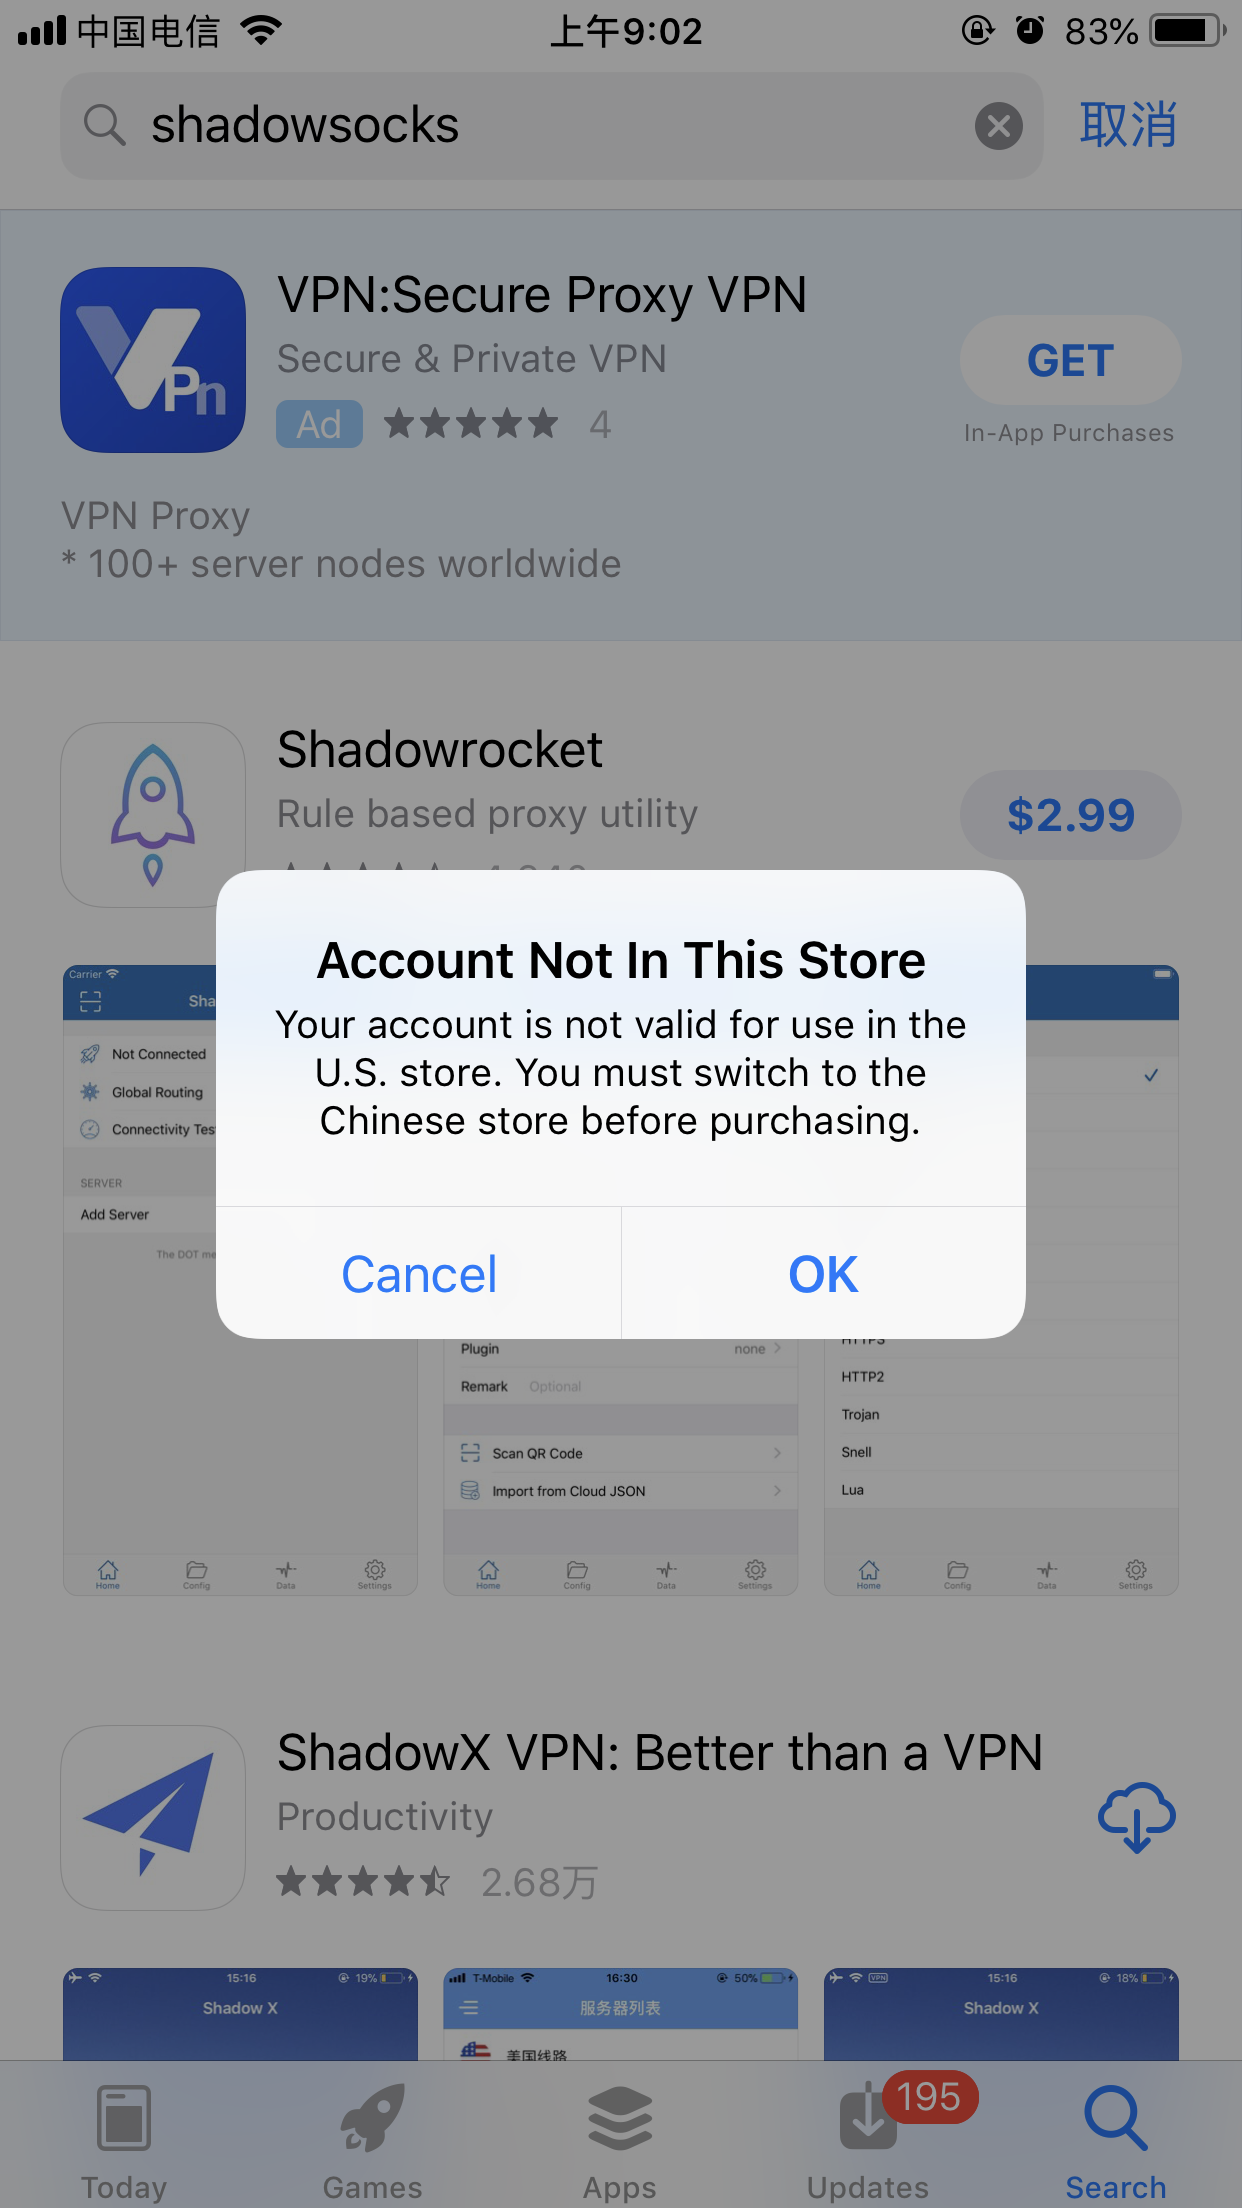 Account Not in This Store, your account is not valid for use in the U.S. store. You must switch to Chinese stores before purchasing